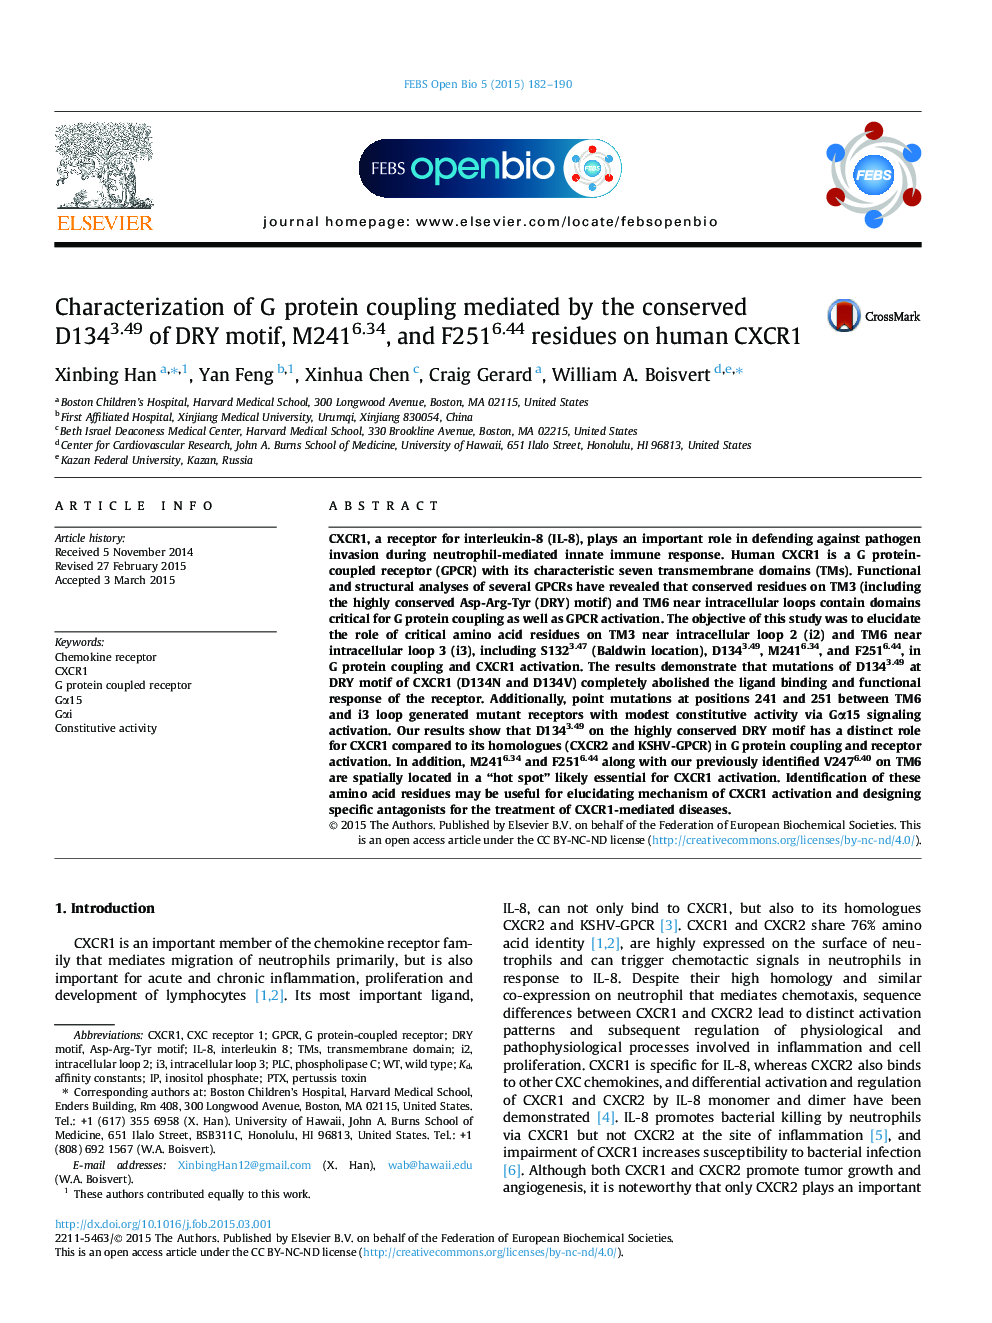 Characterization of G protein coupling mediated by the conserved D1343.49 of DRY motif, M2416.34, and F2516.44 residues on human CXCR1